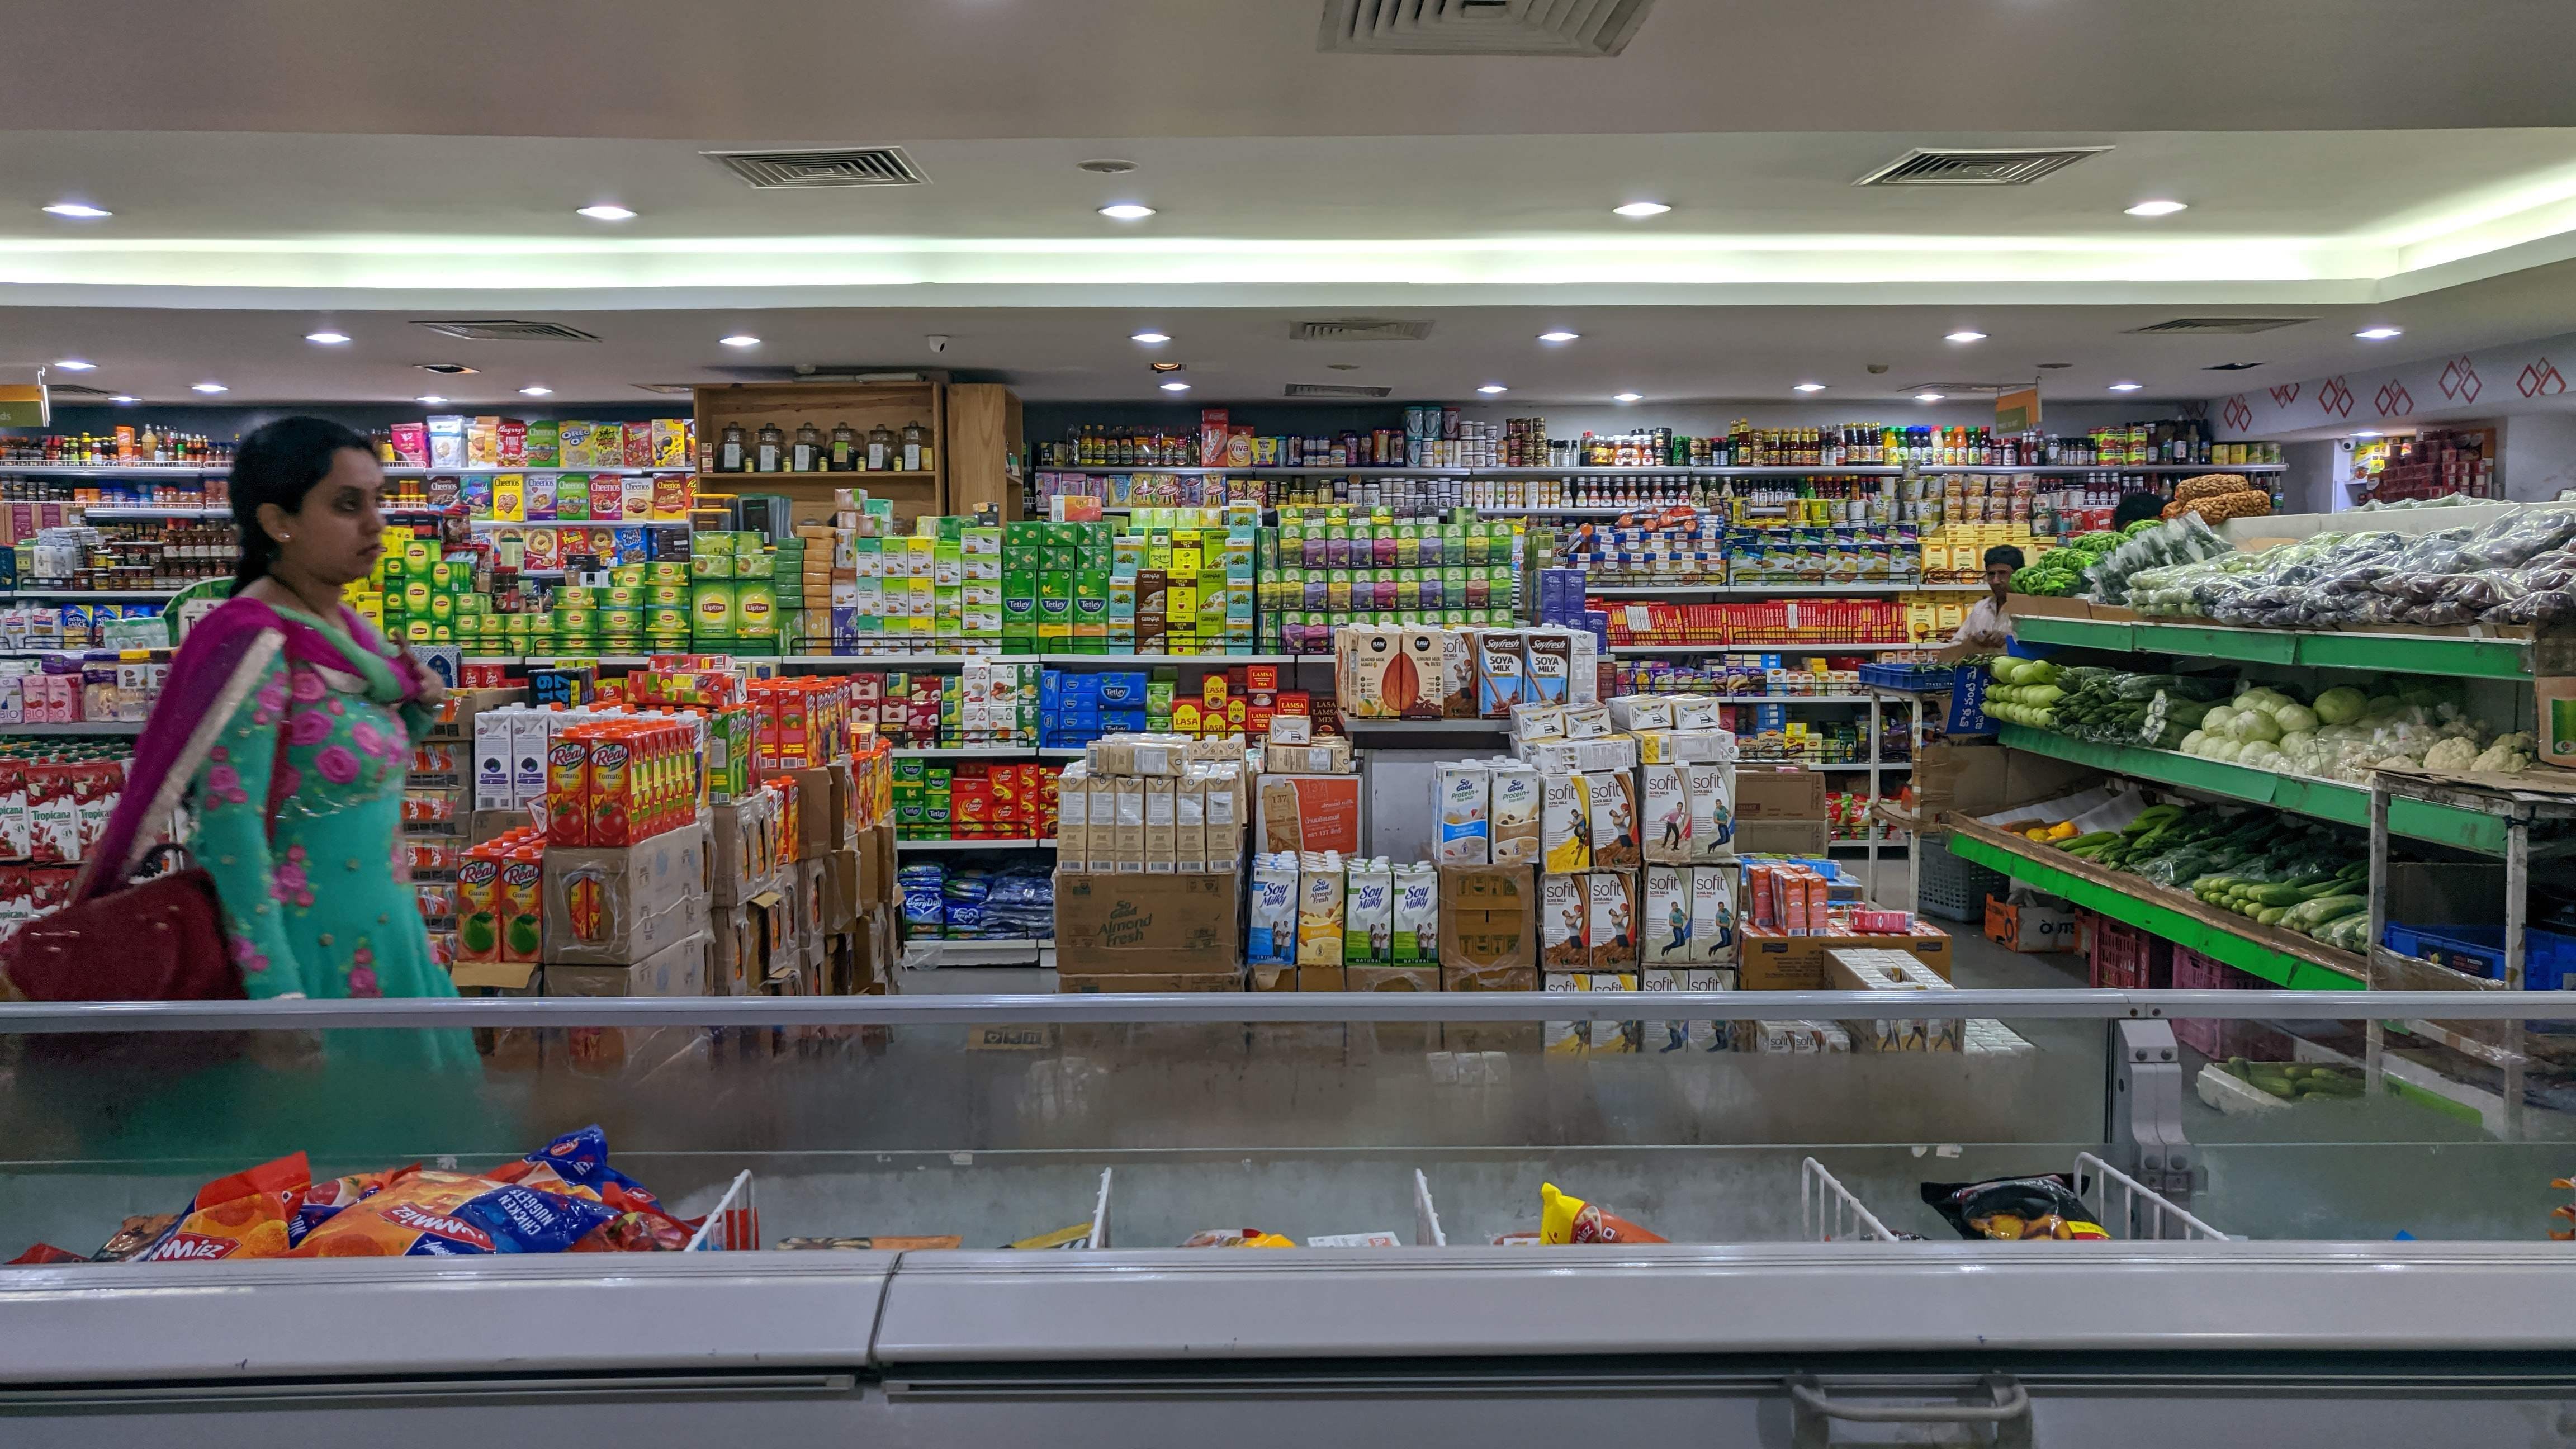 Supermarket,Retail,Convenience store,Grocery store,Convenience food,Building,Product,Trade,Customer,Grocer